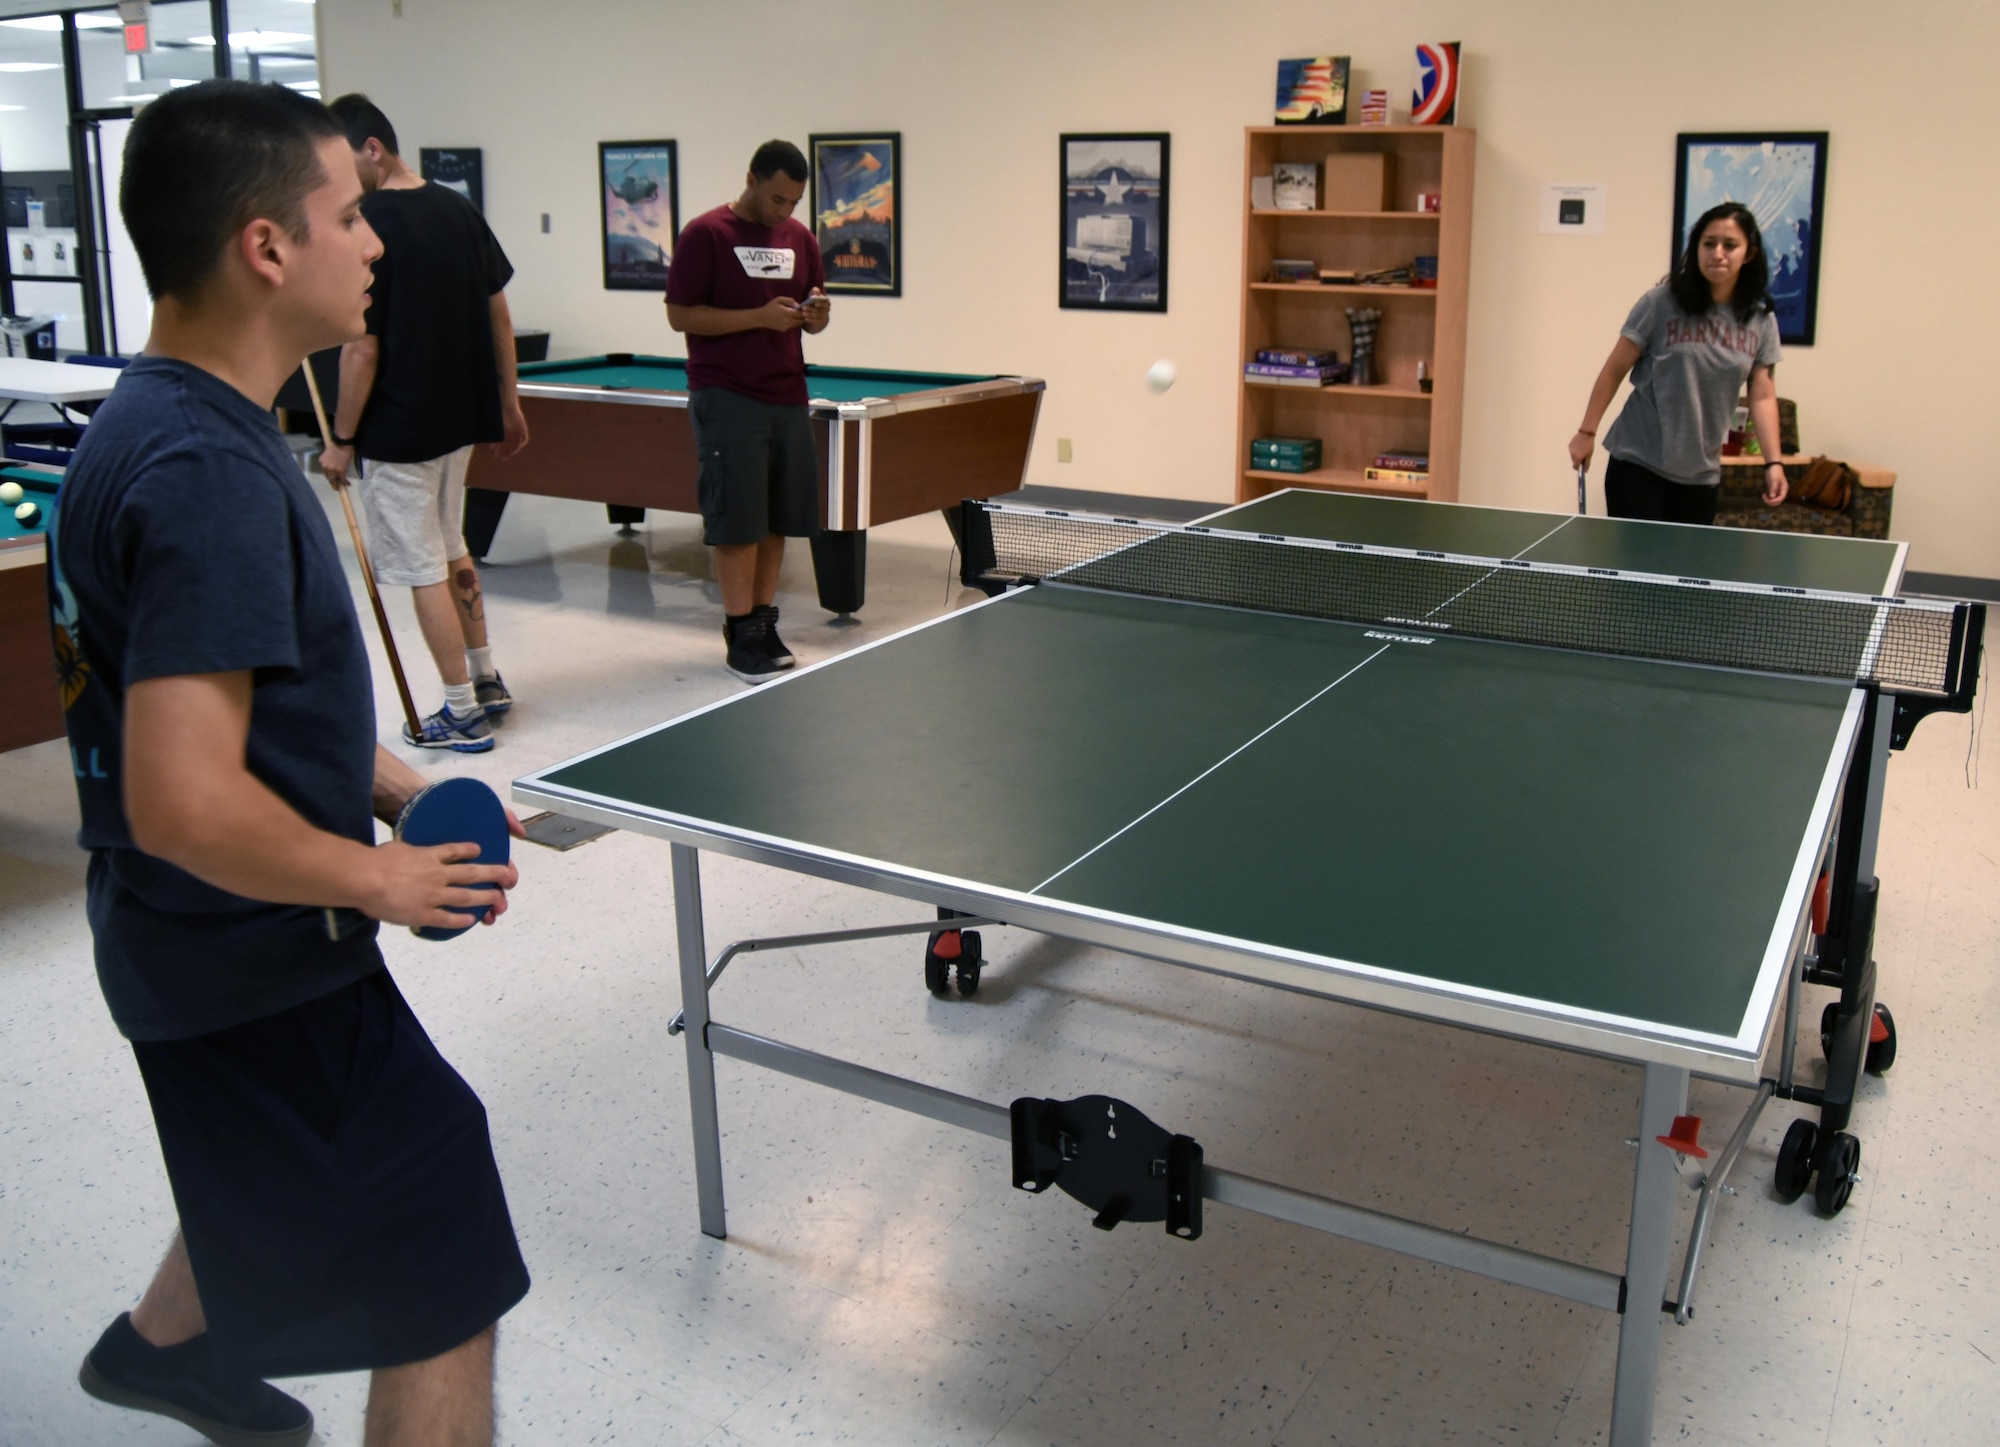 Two airmen play table tennis with each other at the Gravity Airman Ministry Center at Kirtland Air Force Base, New Mexico. Gravity hosts events every Thursday, Friday, and Saturday nights, and most holidays. (U.S. Air Force Photo by Senior Airman Chandler Baker)